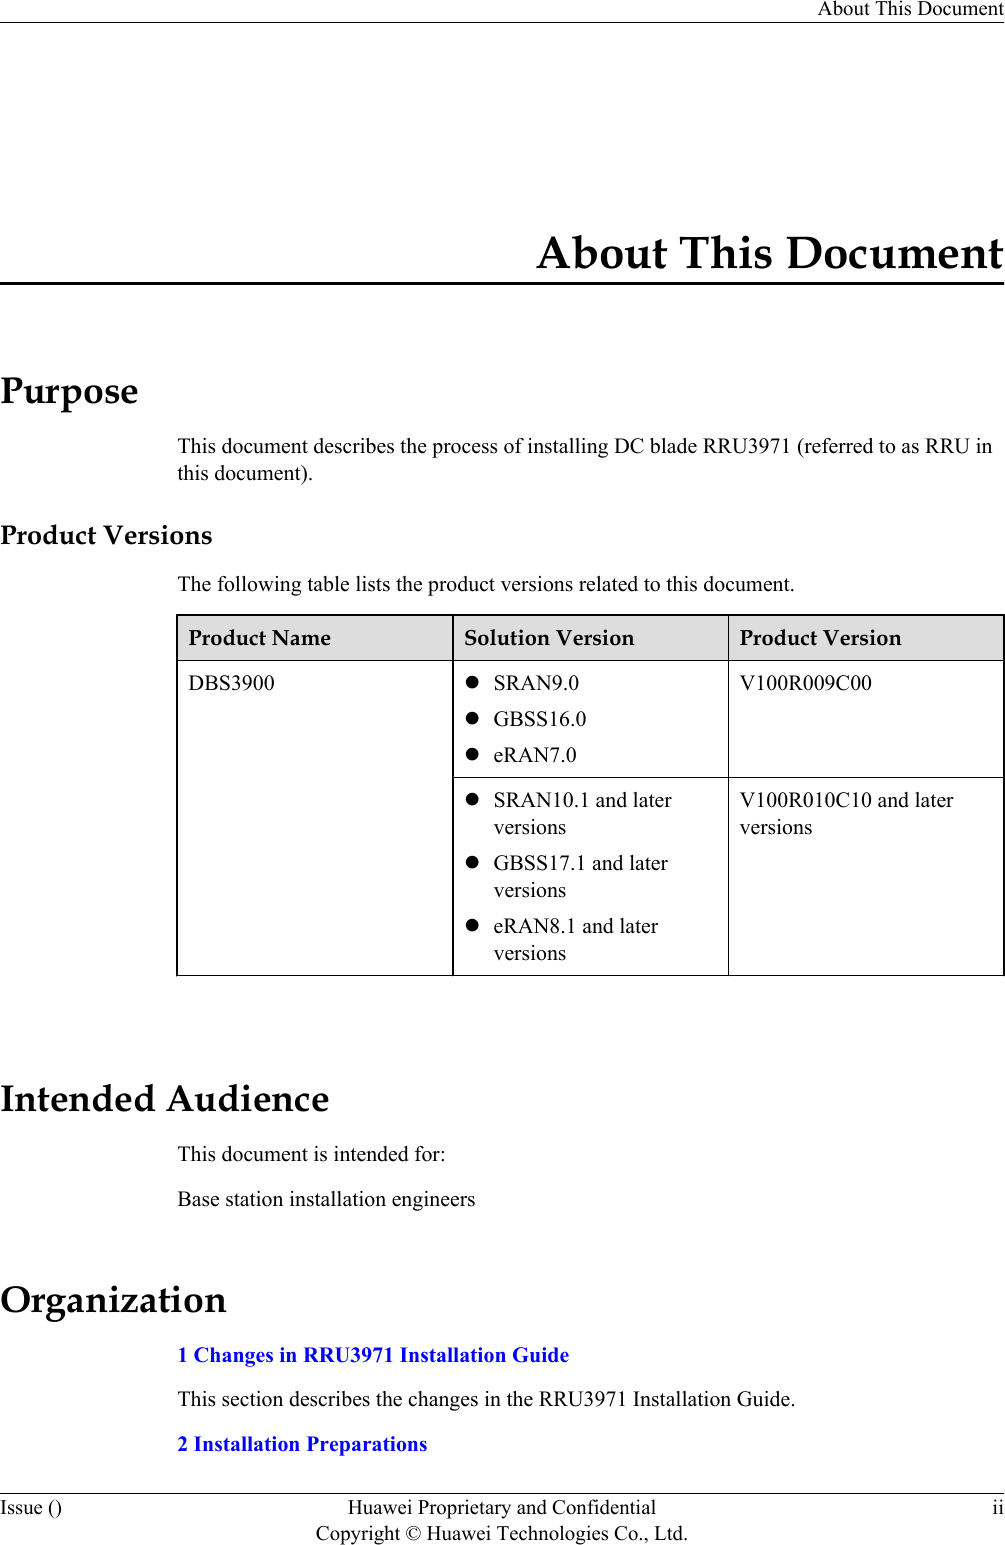 About This DocumentPurposeThis document describes the process of installing DC blade RRU3971 (referred to as RRU inthis document).Product VersionsThe following table lists the product versions related to this document.Product Name Solution Version Product VersionDBS3900 lSRAN9.0lGBSS16.0leRAN7.0V100R009C00lSRAN10.1 and laterversionslGBSS17.1 and laterversionsleRAN8.1 and laterversionsV100R010C10 and laterversions Intended AudienceThis document is intended for:Base station installation engineersOrganization1 Changes in RRU3971 Installation GuideThis section describes the changes in the RRU3971 Installation Guide.2 Installation PreparationsAbout This DocumentIssue () Huawei Proprietary and ConfidentialCopyright © Huawei Technologies Co., Ltd.ii